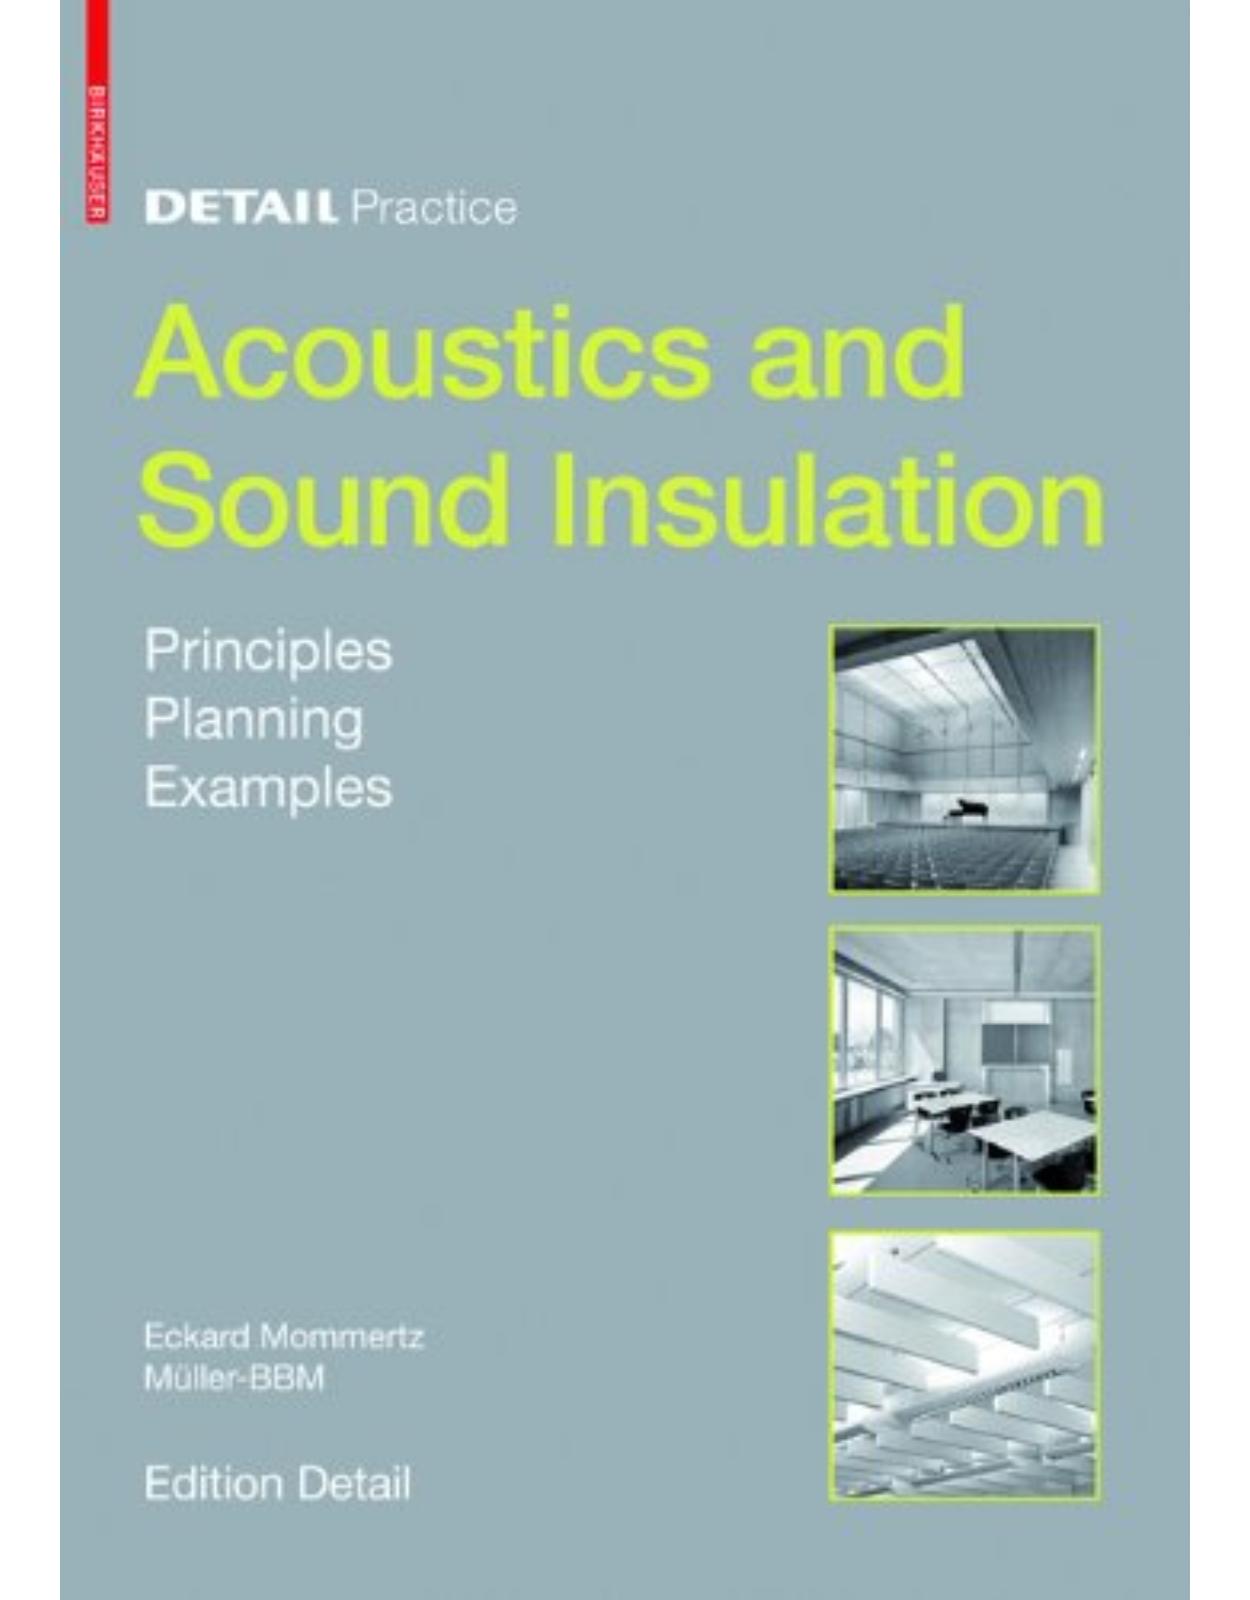 Detail Practice: Acoustics and Sound Insulation: Principles, Planning, Examples